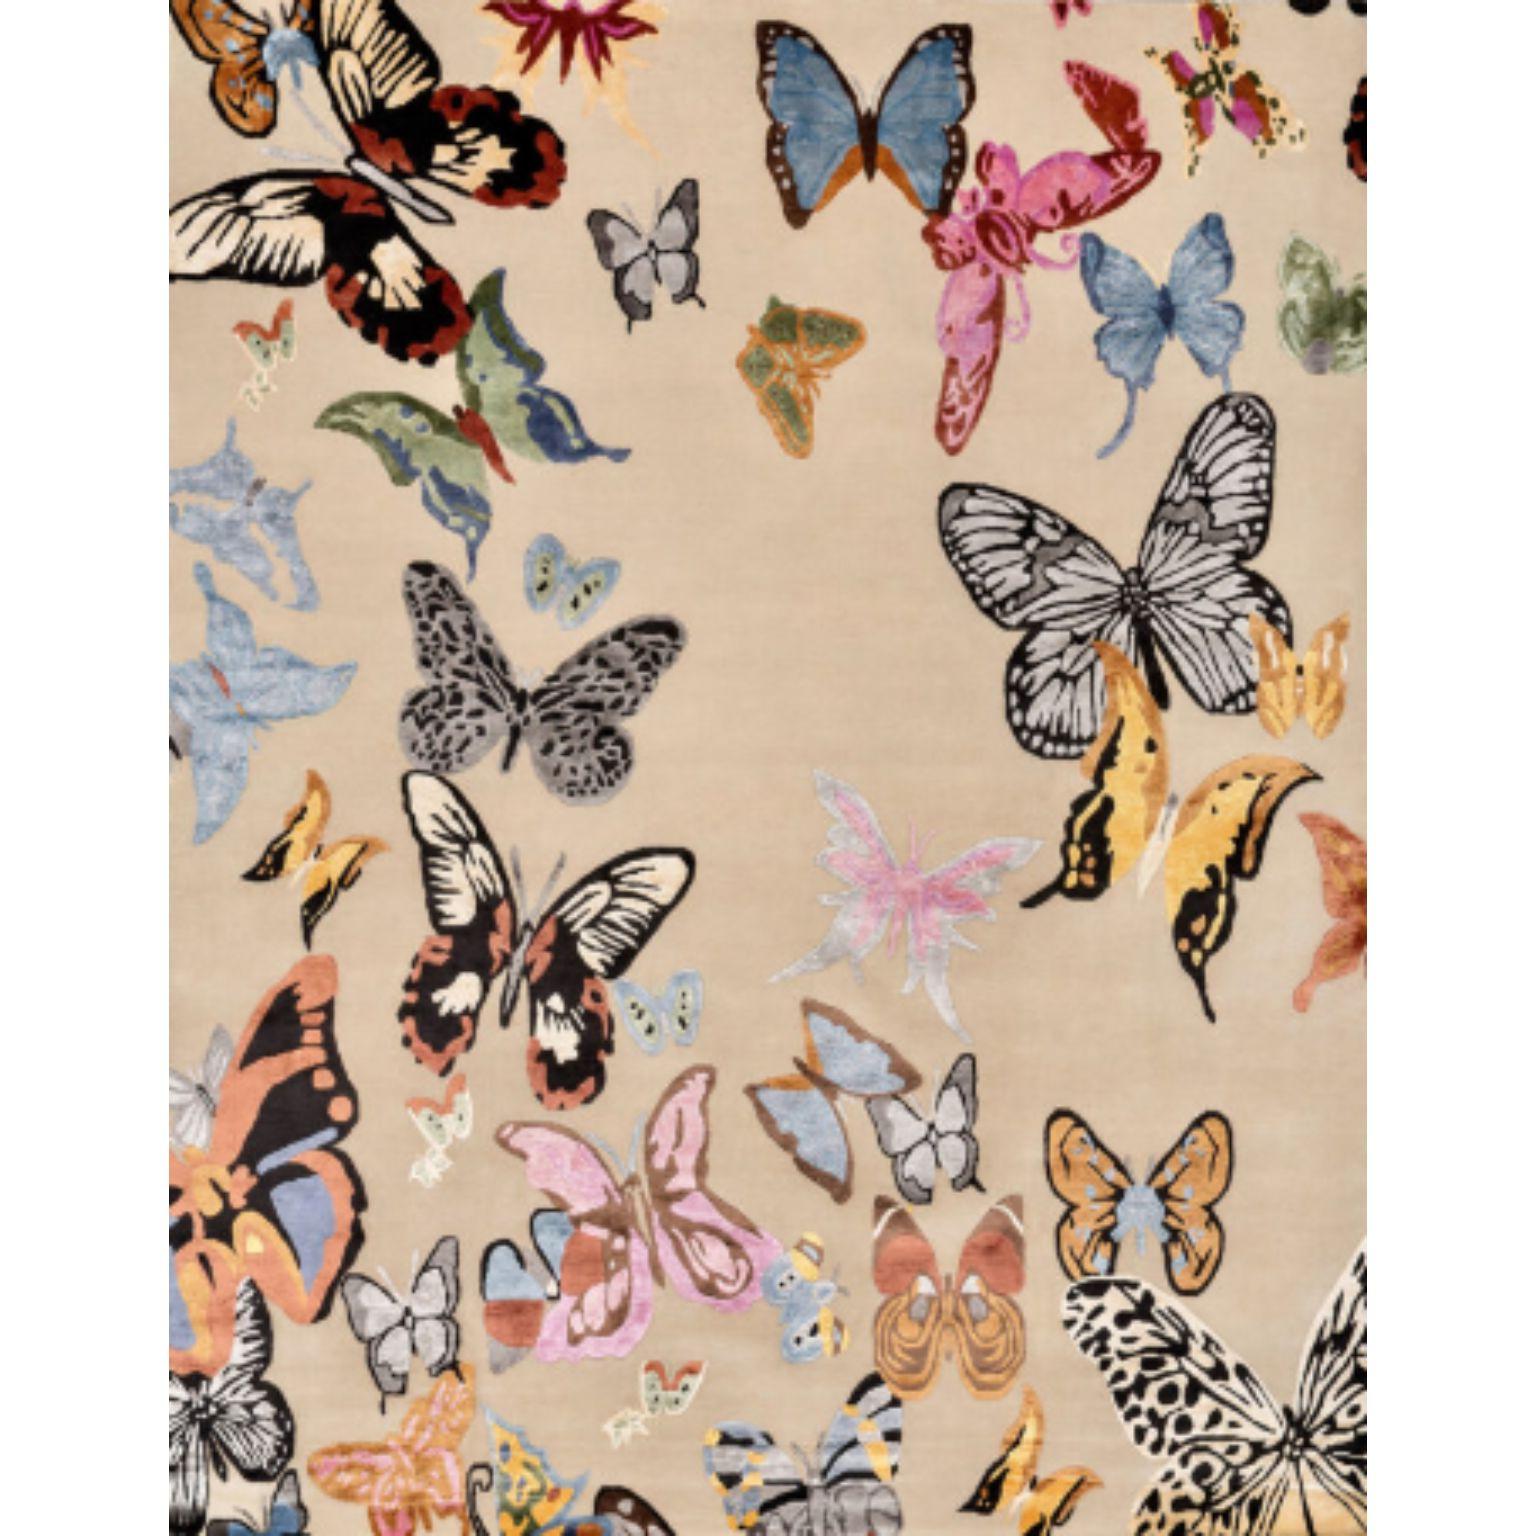 MADAMA BUTTERFLY 200 rug by Illulian
Dimensions: D300 x H200 cm 
Materials: Wool 50% , Silk 50%
Variations available and prices may vary according to materials and sizes. Please contact us.

Illulian, historic and prestigious rug company brand,